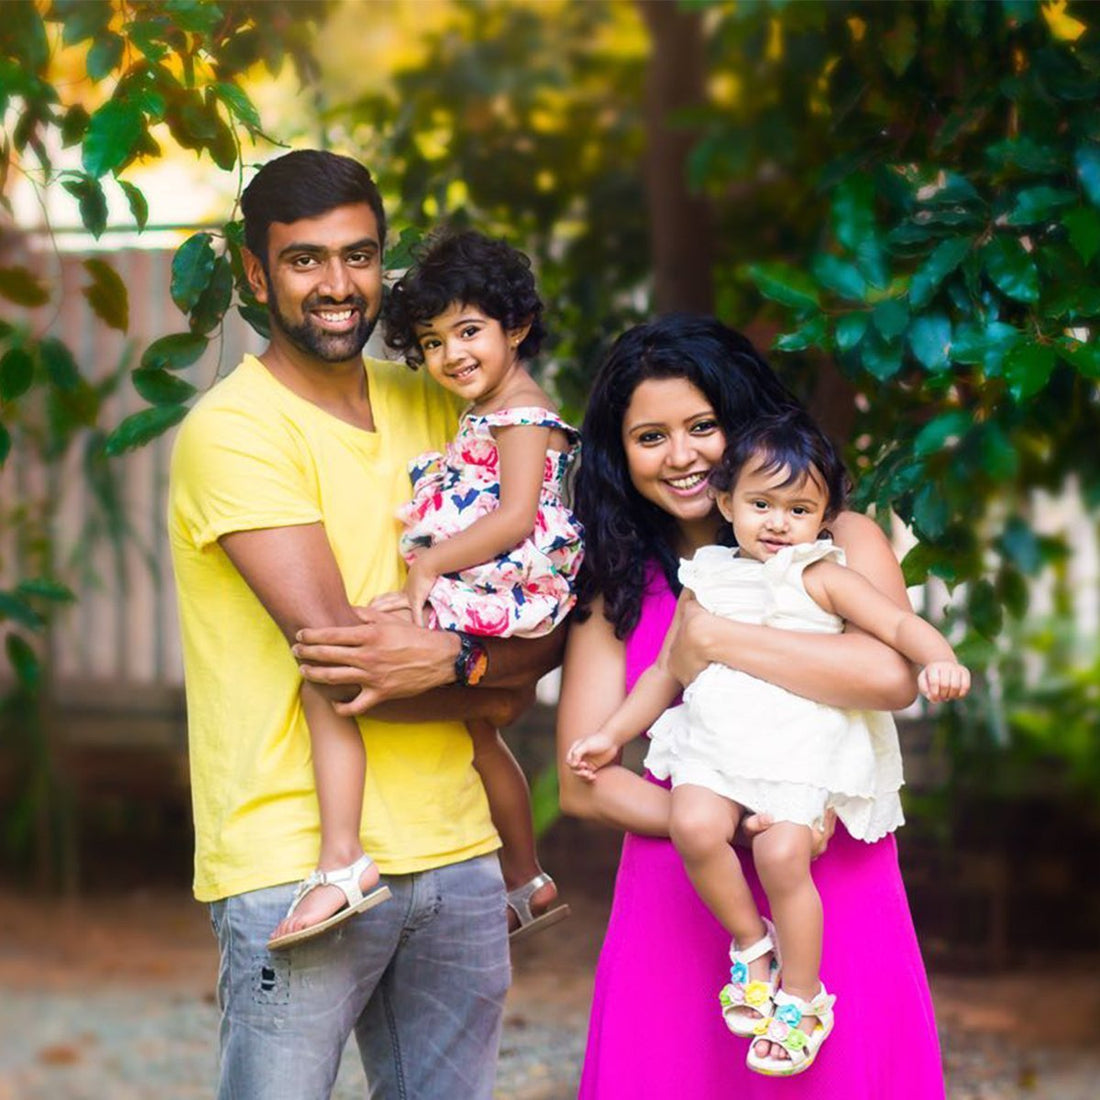 A mother speaks! Prithi Ashwin on what motherhood means to her...